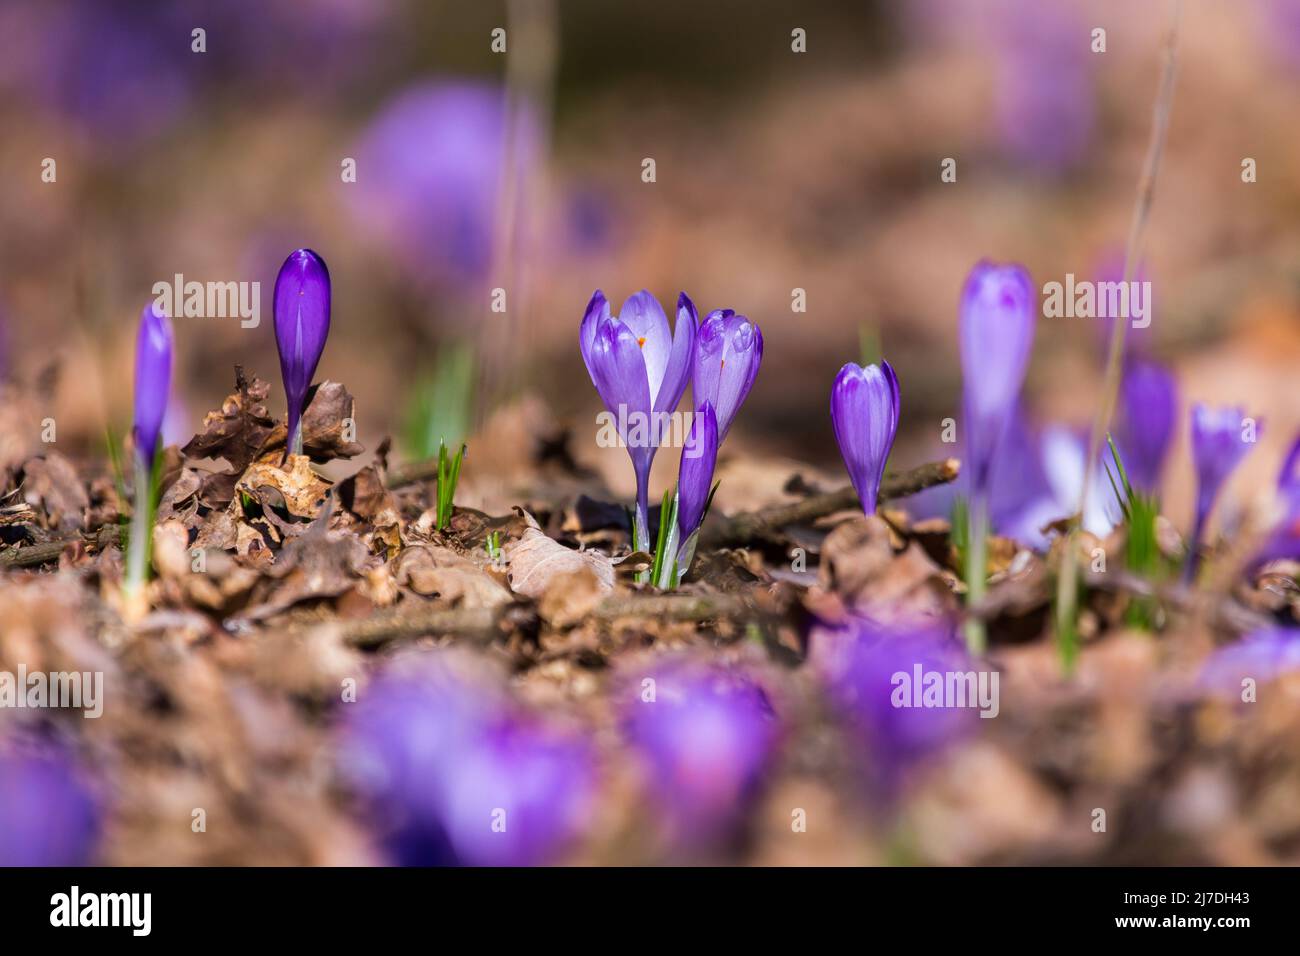 Closeup of blooming purple crocus flowers on a forest floor, nature is awakening after winter Stock Photo